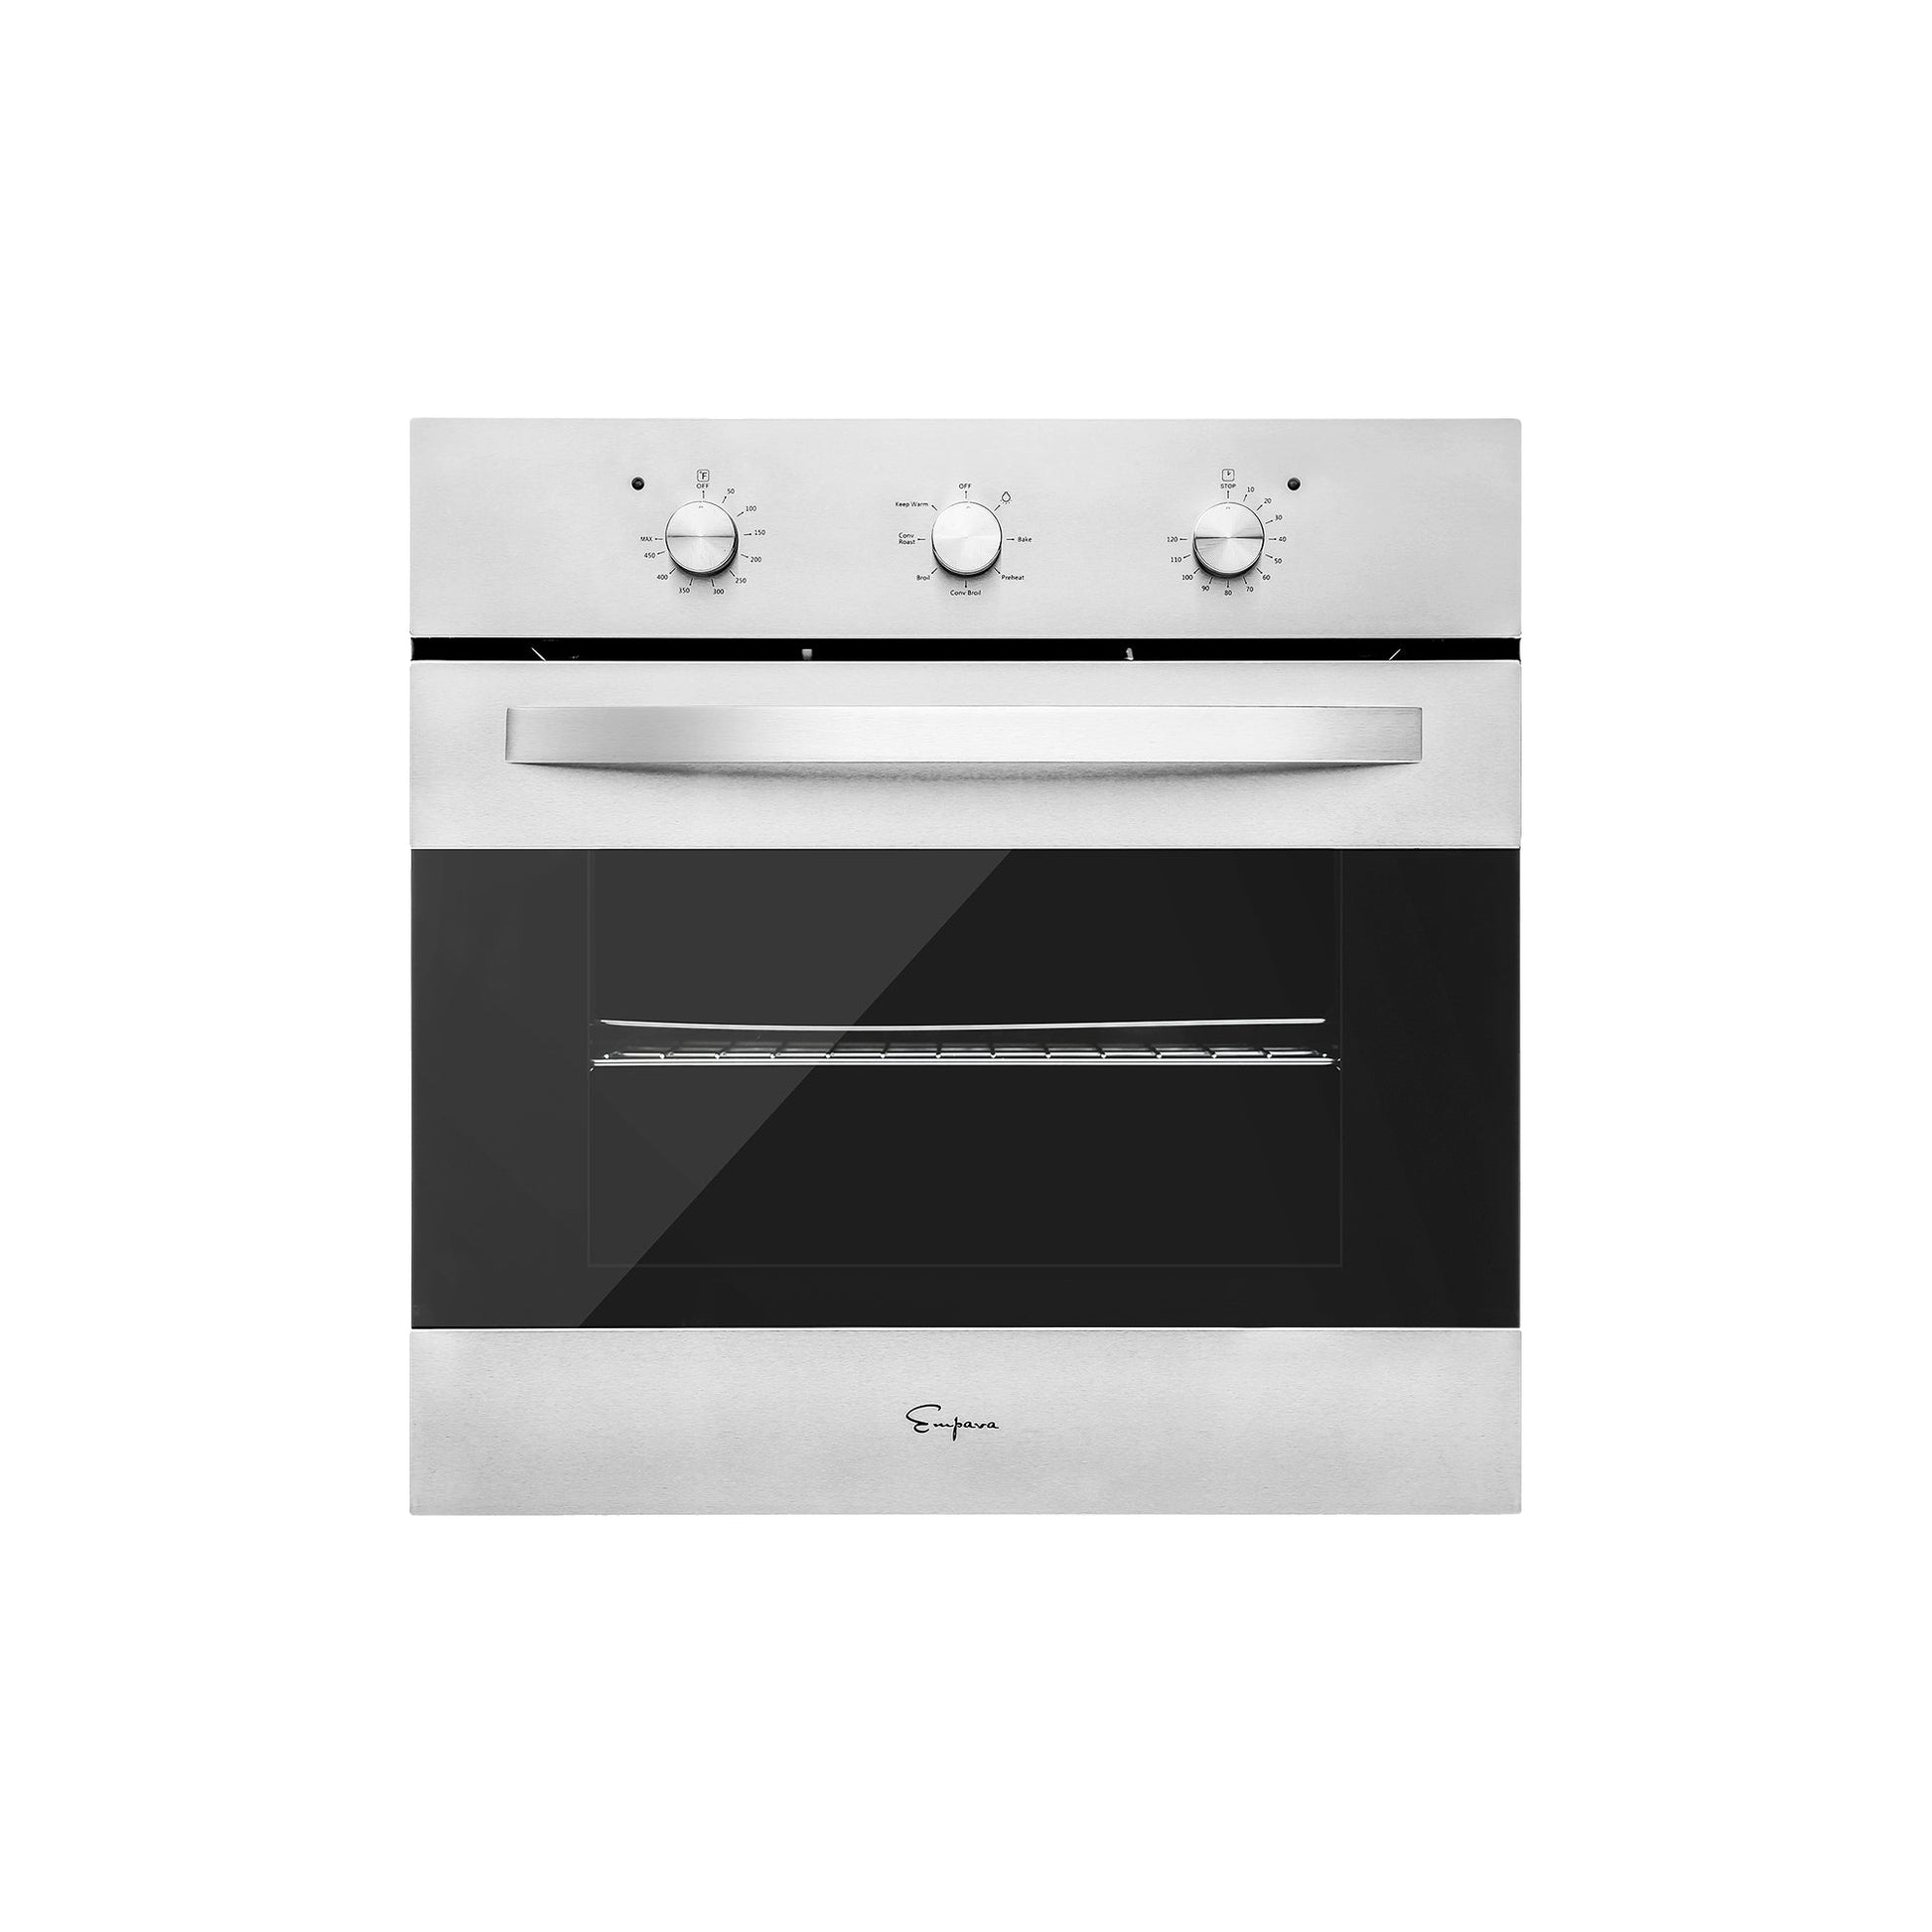 Empava 24" Electric Single Wall Oven - Cooktop Compatible